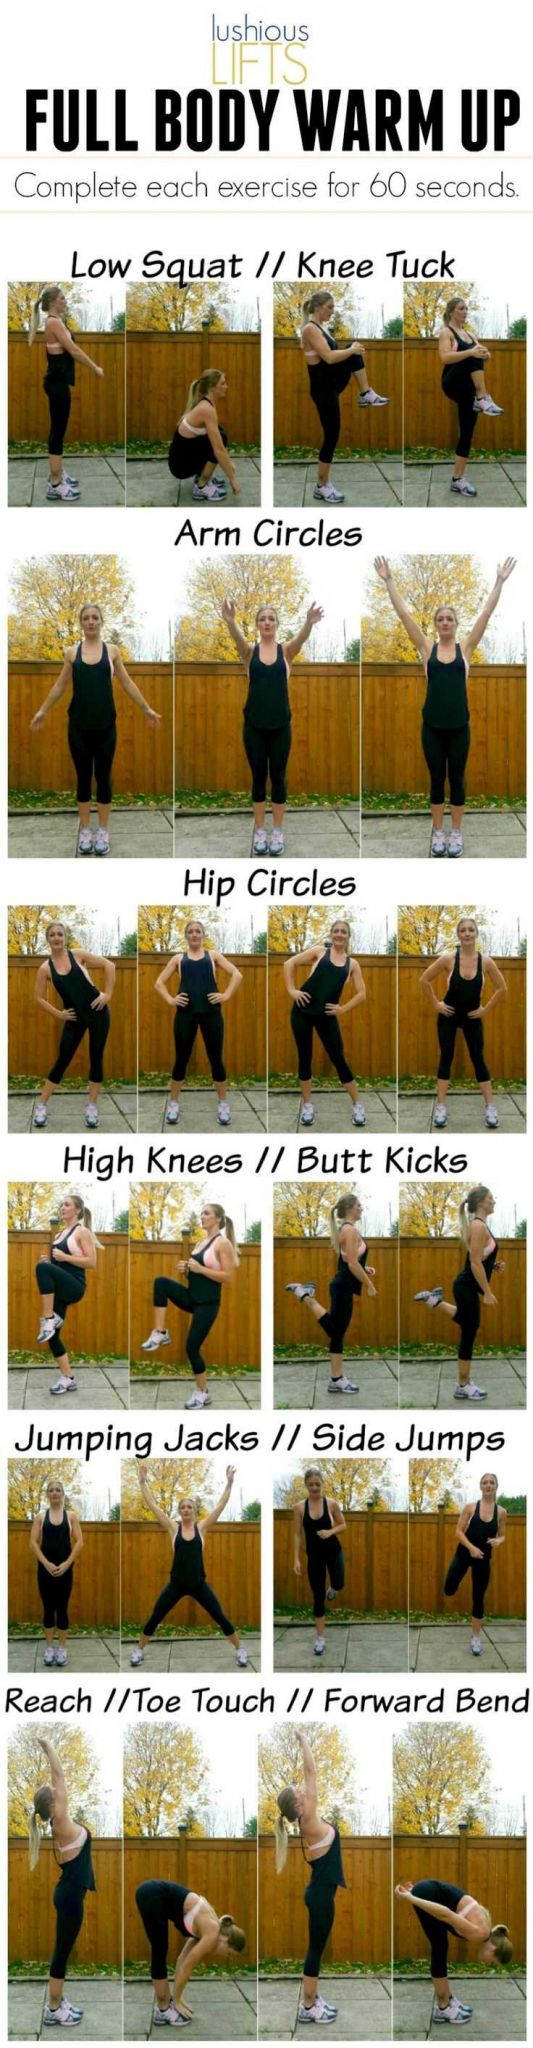 Joints and Movement Worksheet as Well as 372 Best Fitness Images On Pinterest